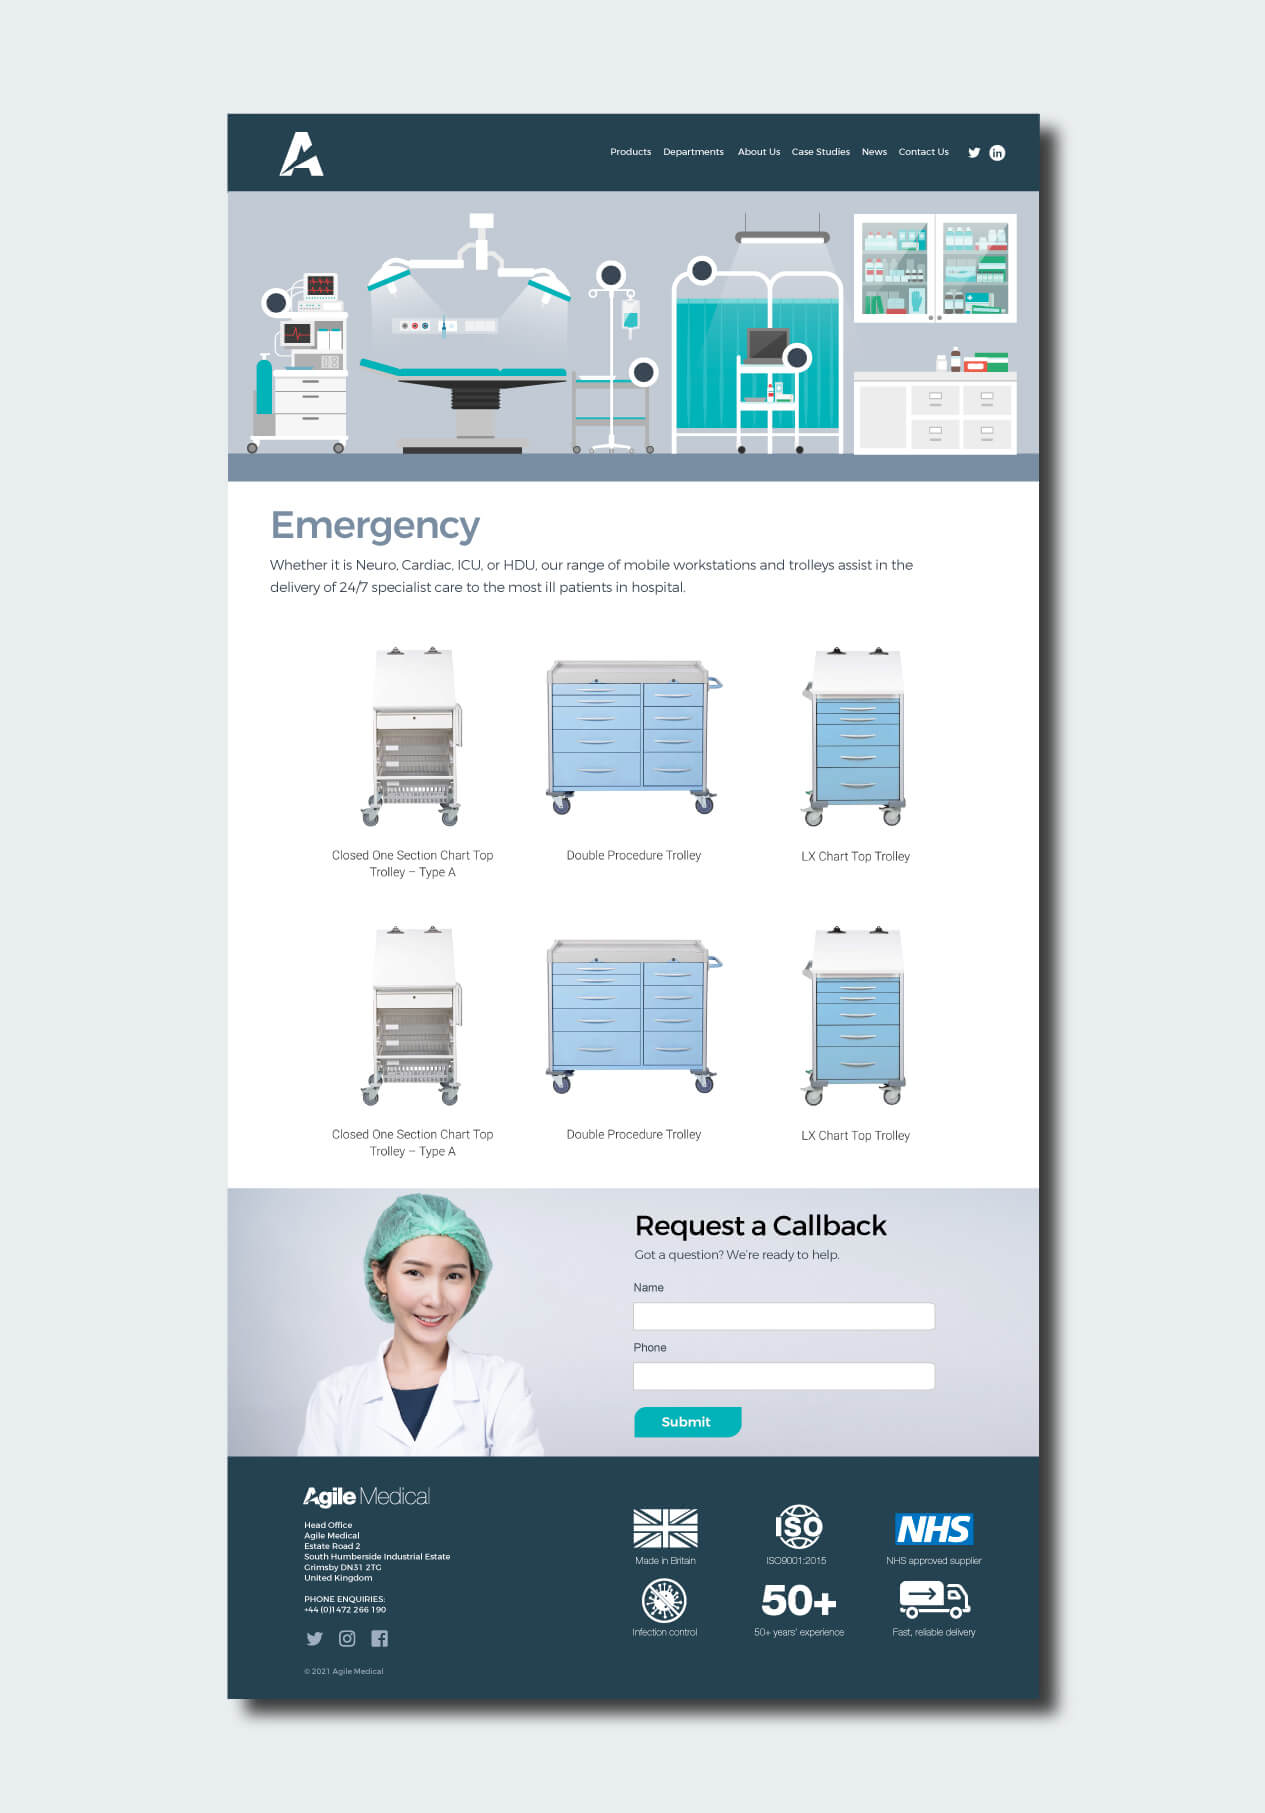 Agile Medical website category page shown on grey/blue background